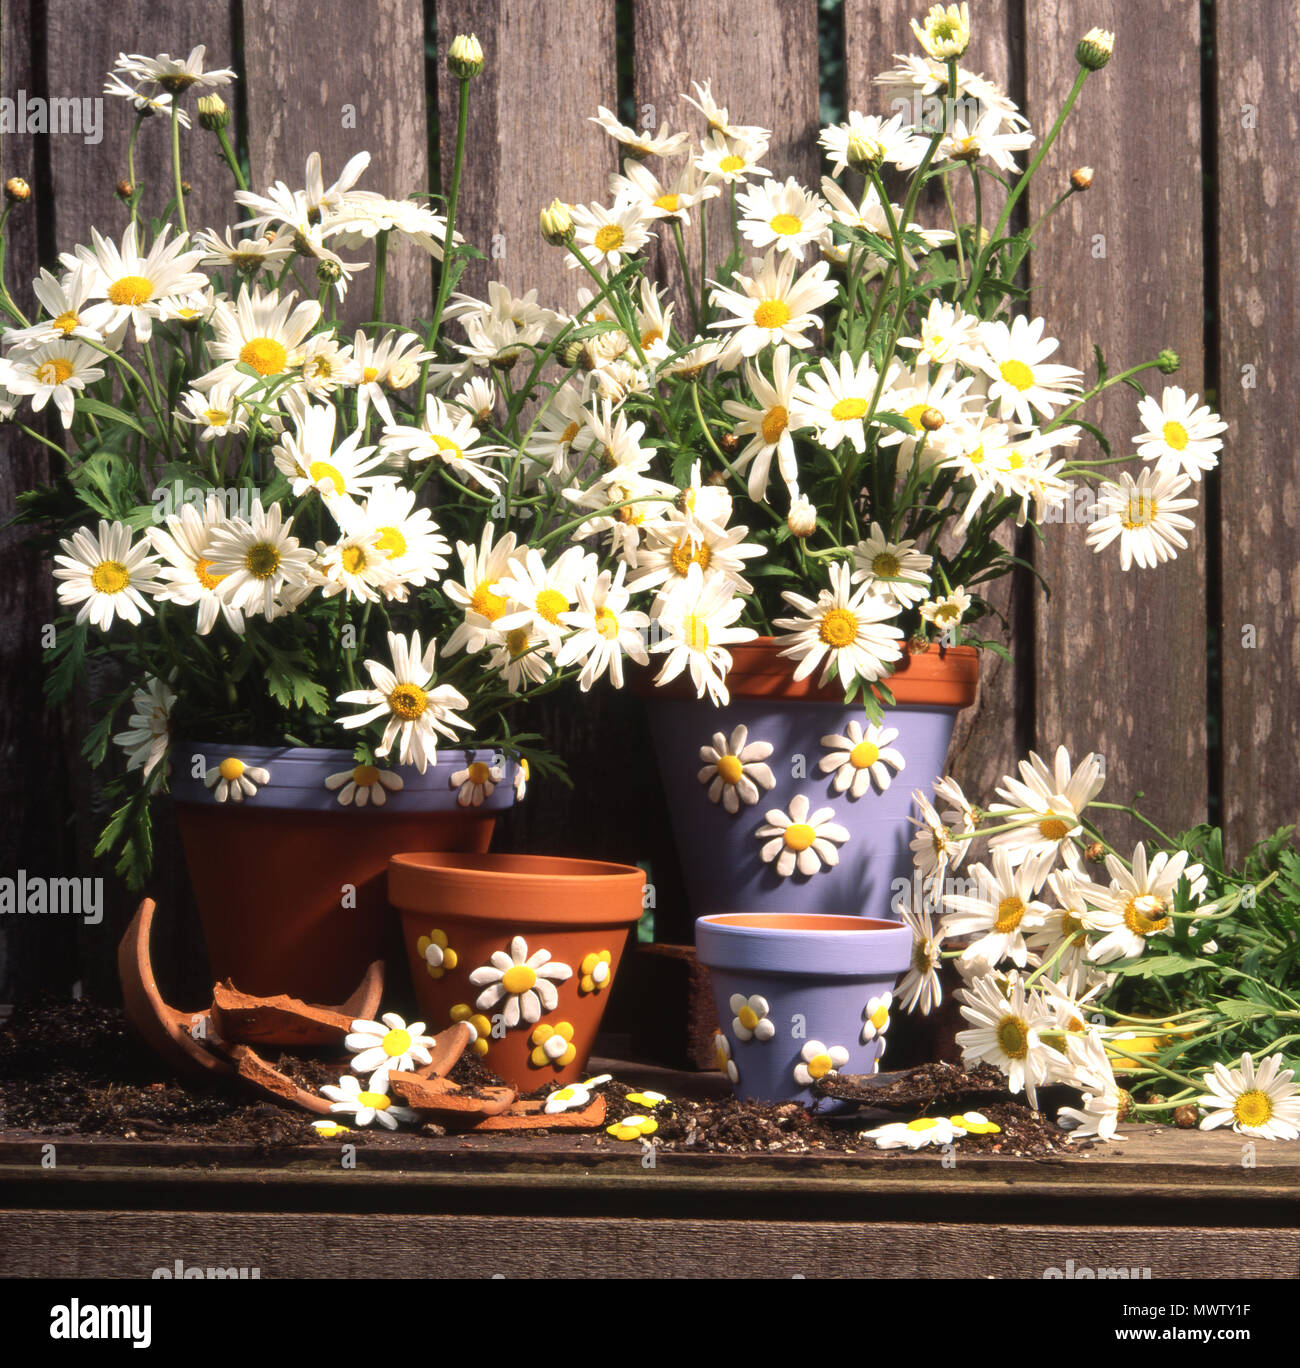 COLOURFUL FLOWER POTS CONTAINING WHITE DAISIES Stock Photo